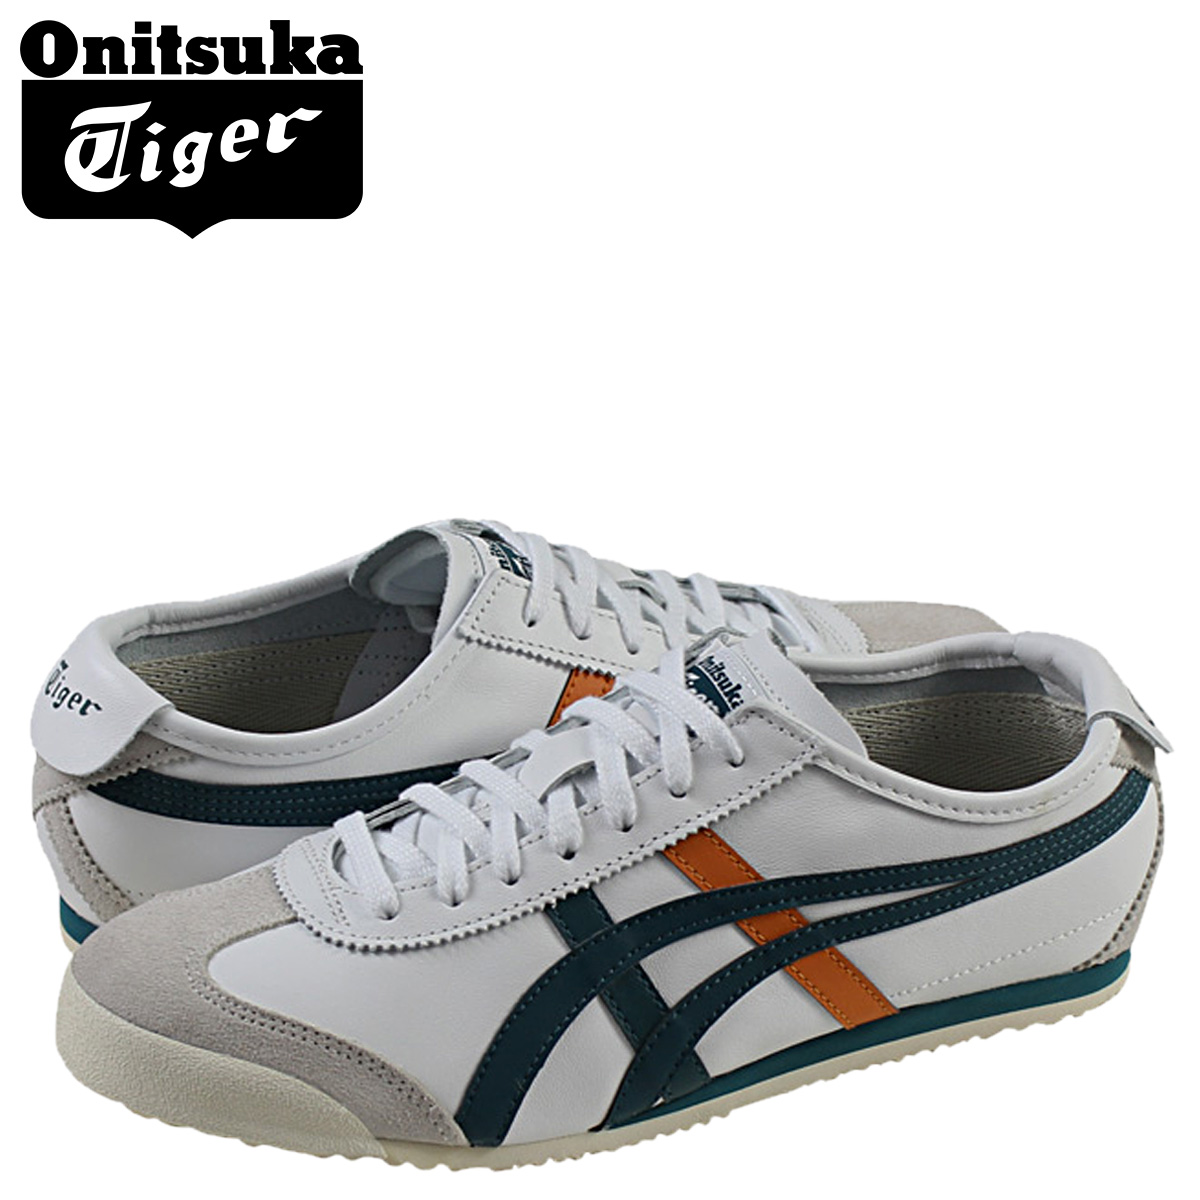 asics and onitsuka tiger difference